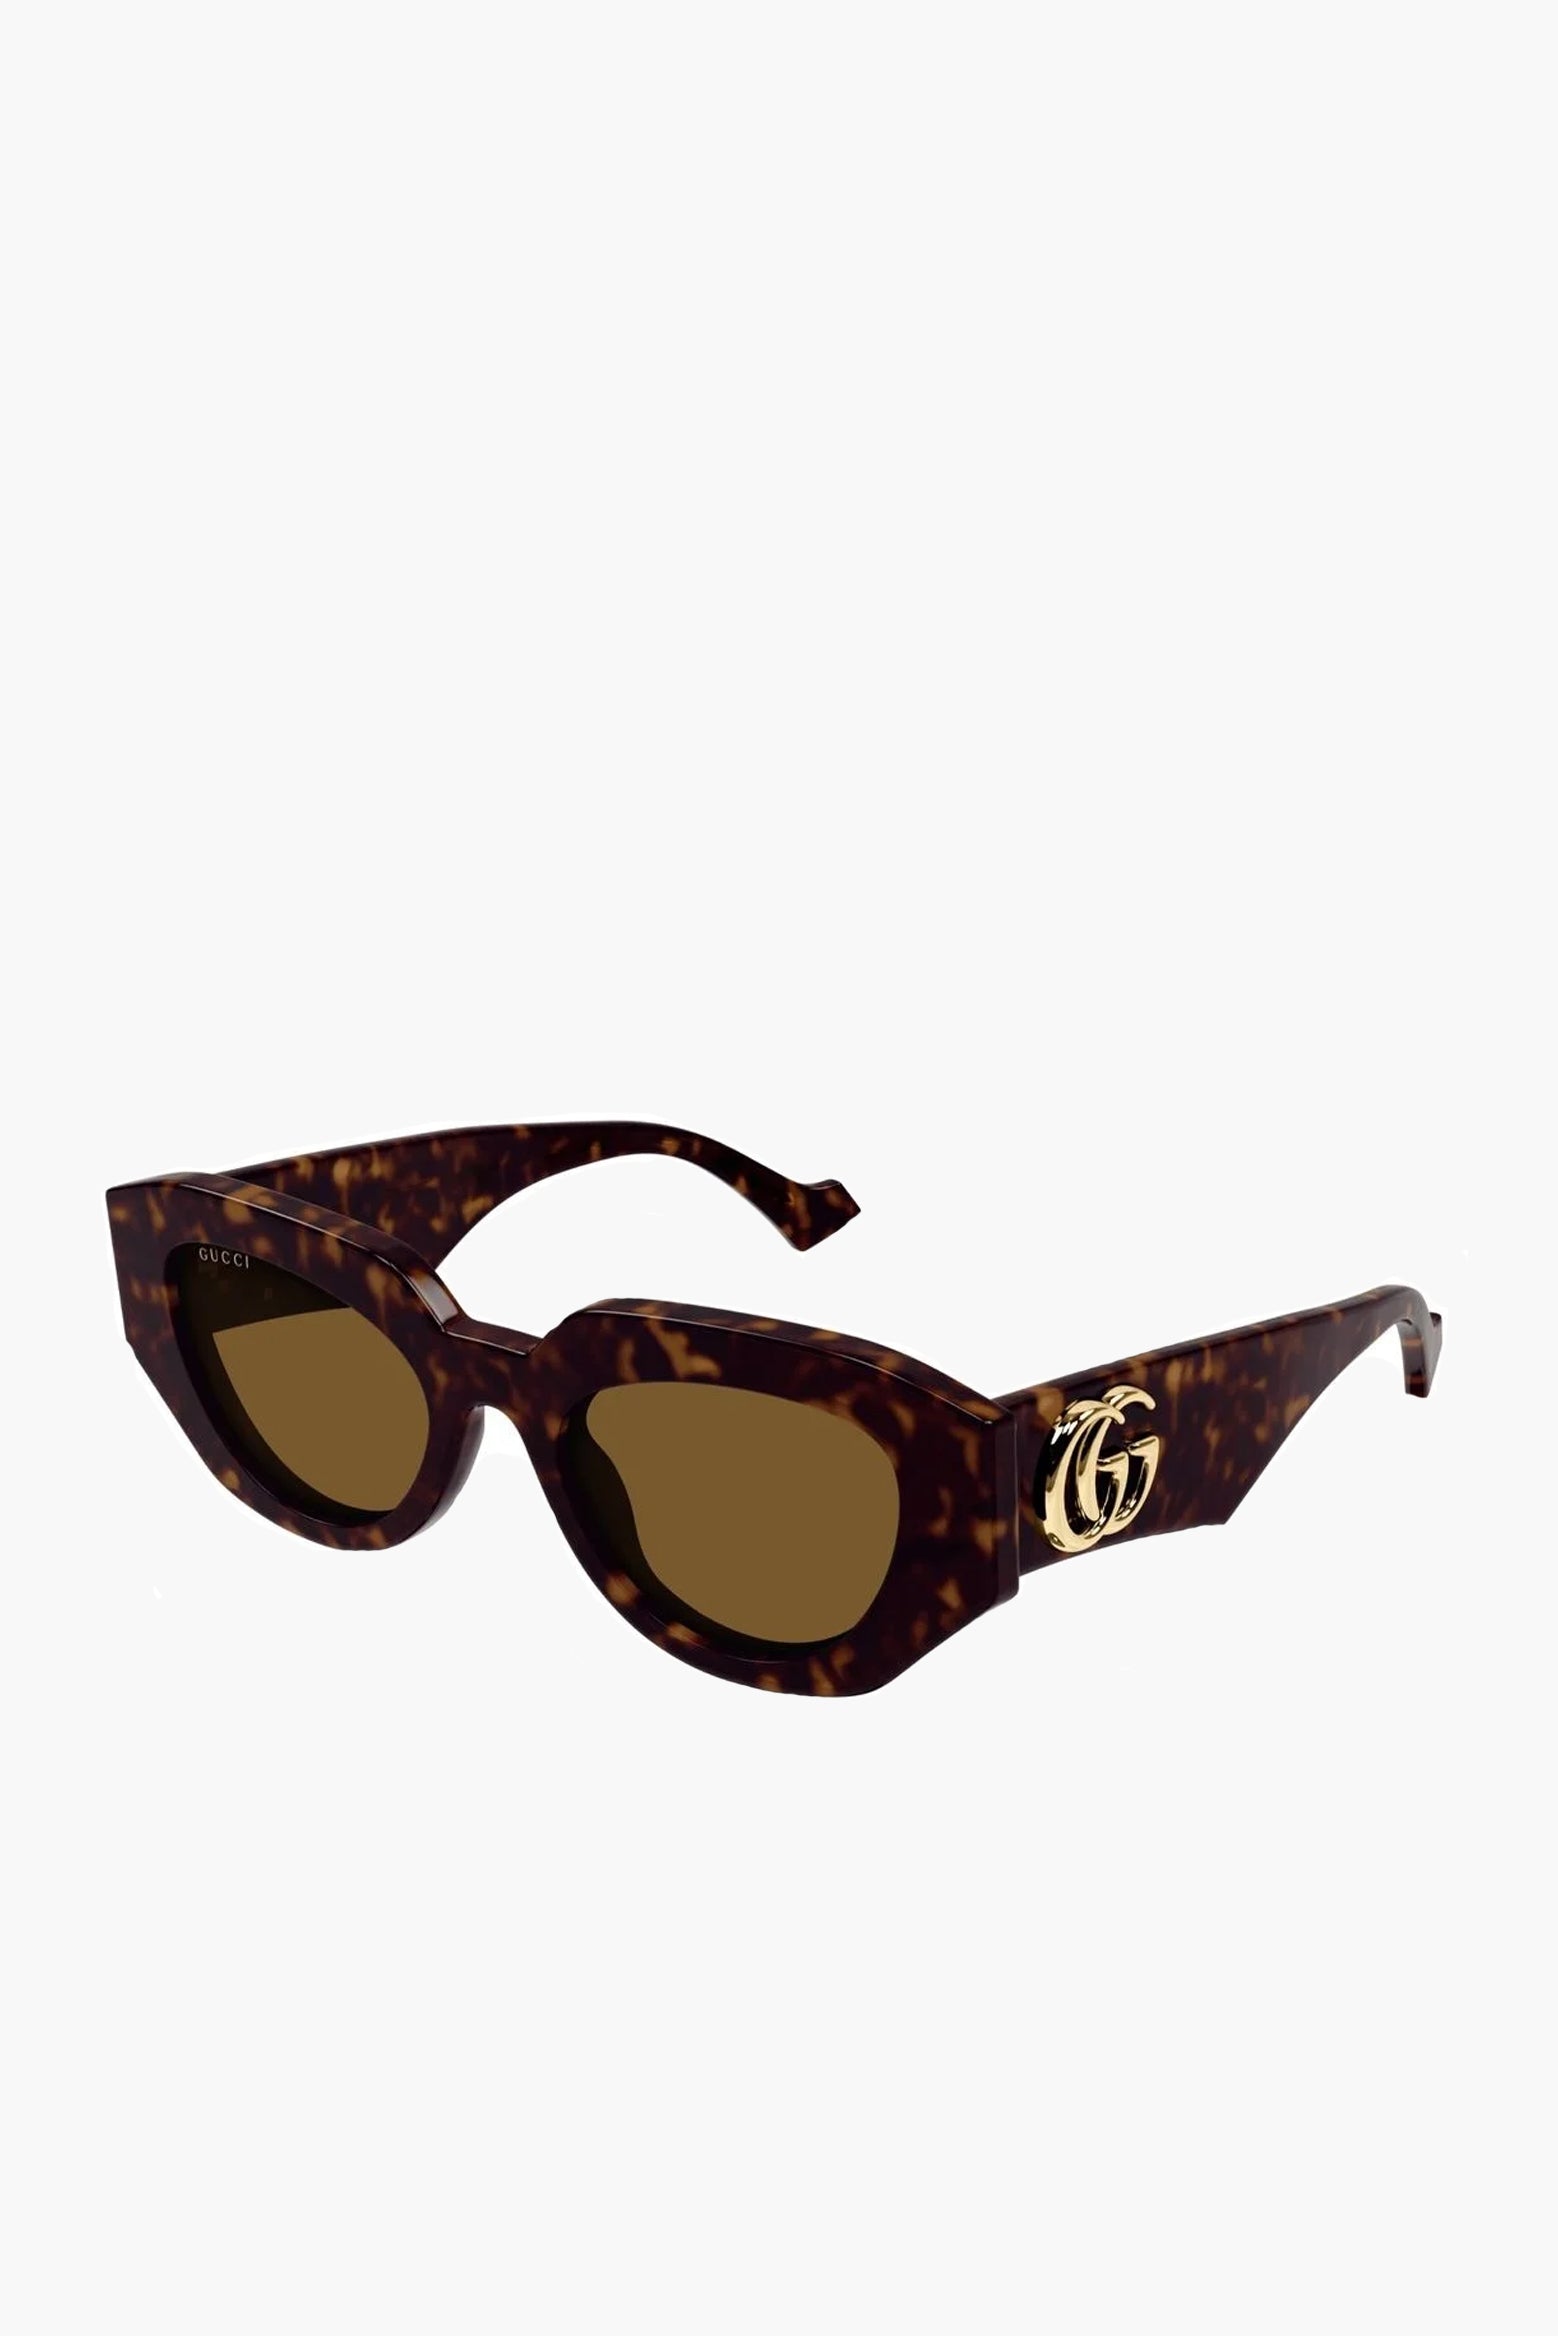 Gucci Geometric Frame Sunglasses in Tortoiseshell available at The New Trend Australia.